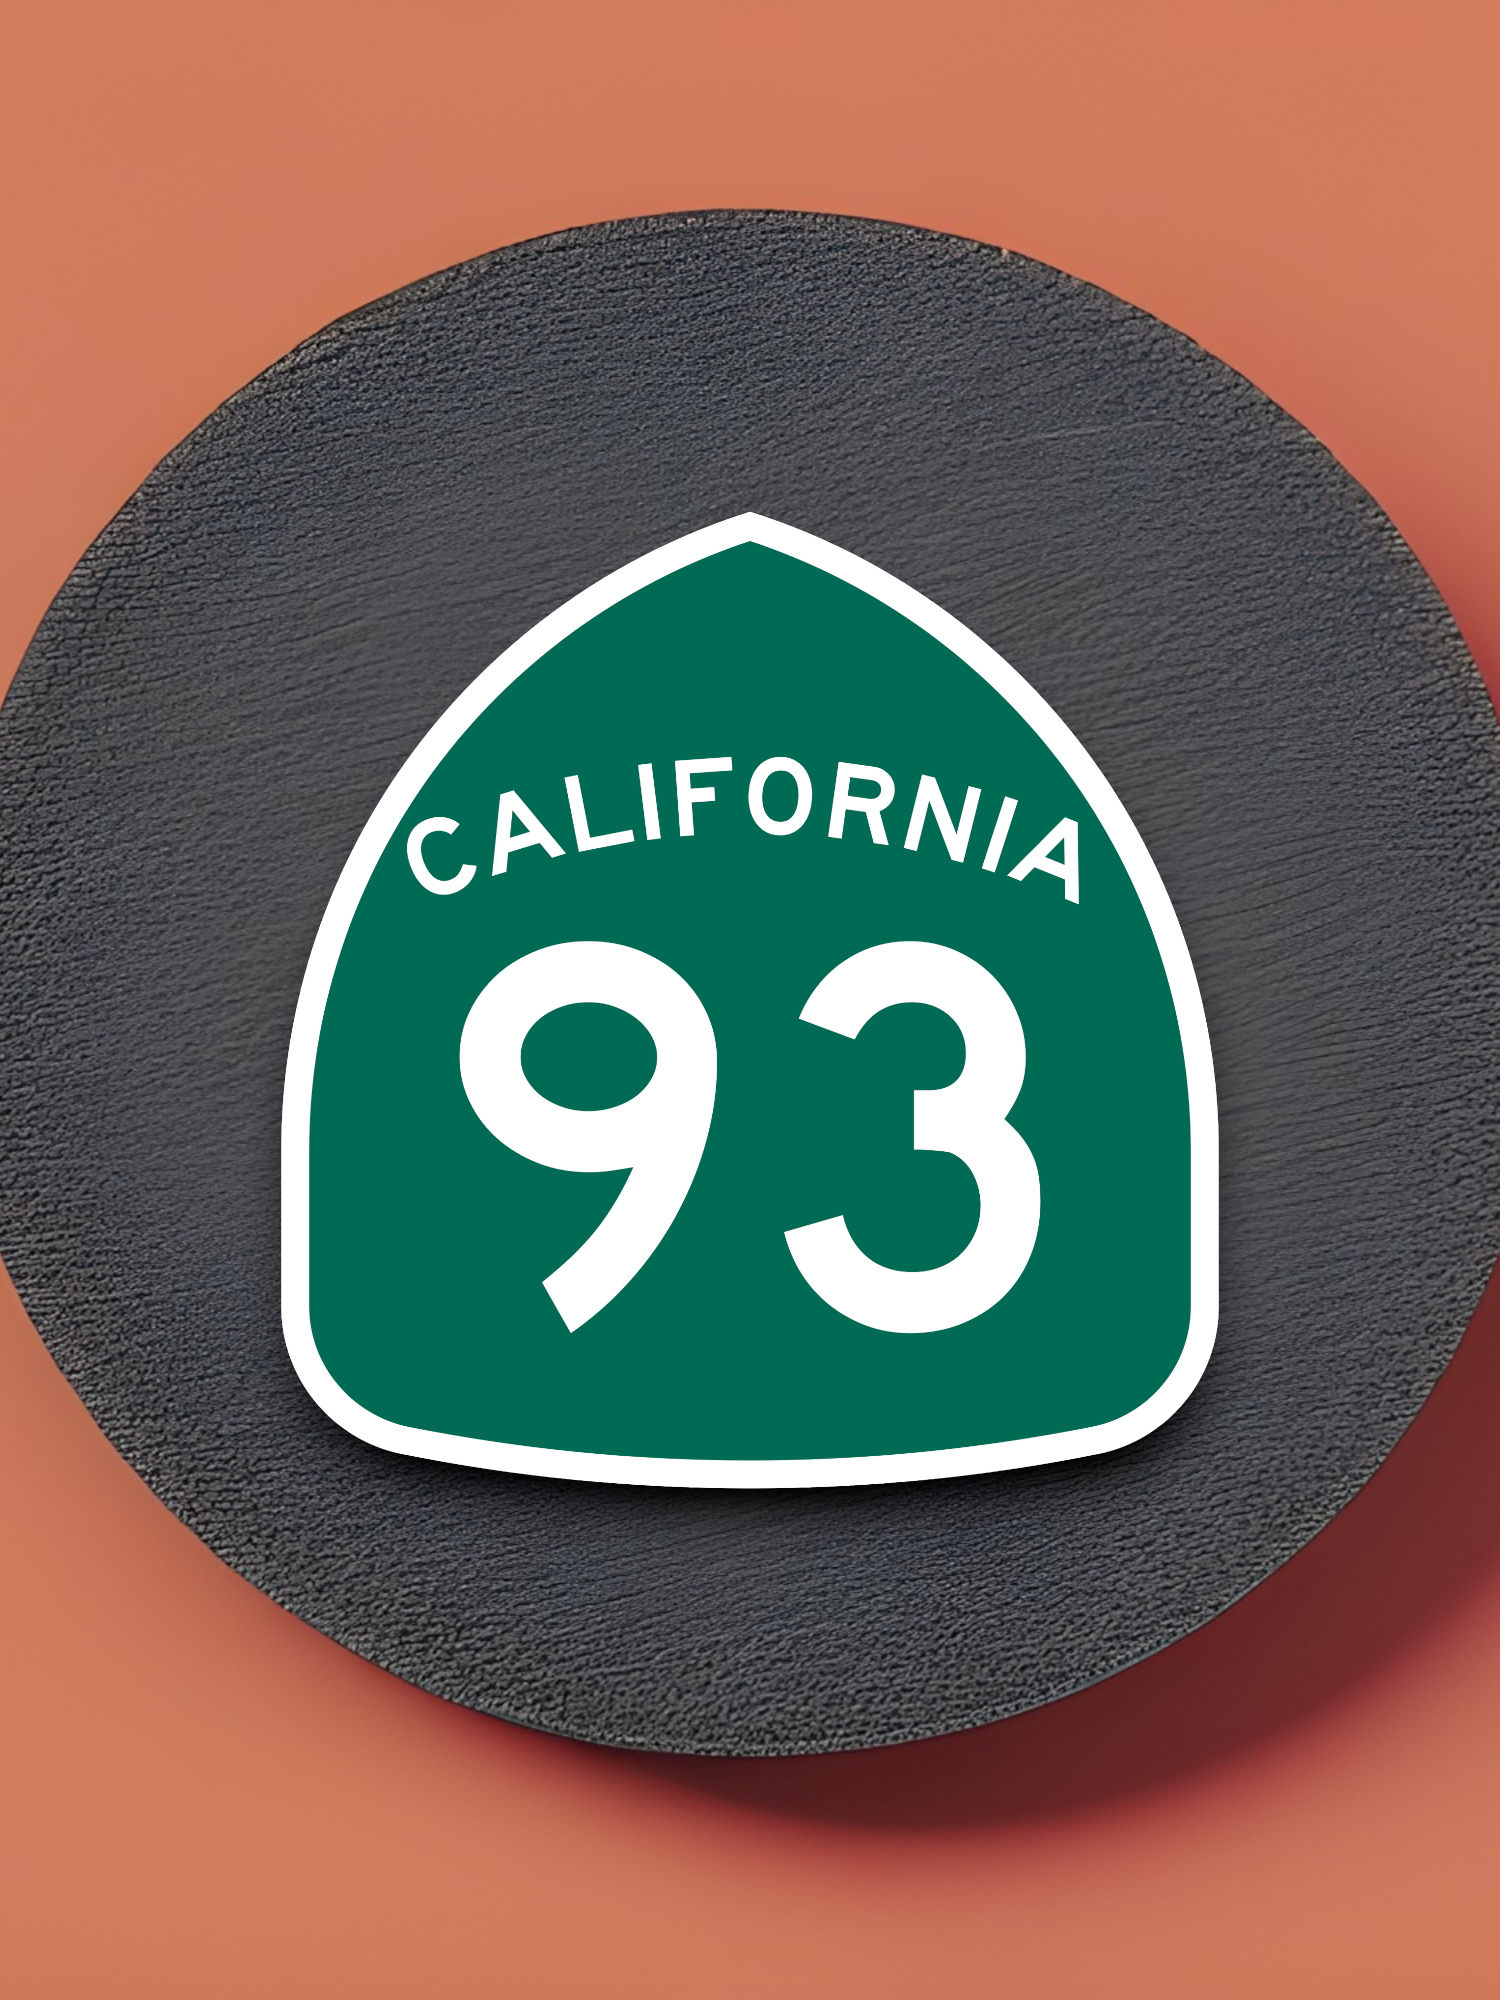 California State Route 93 Road Sign Sticker